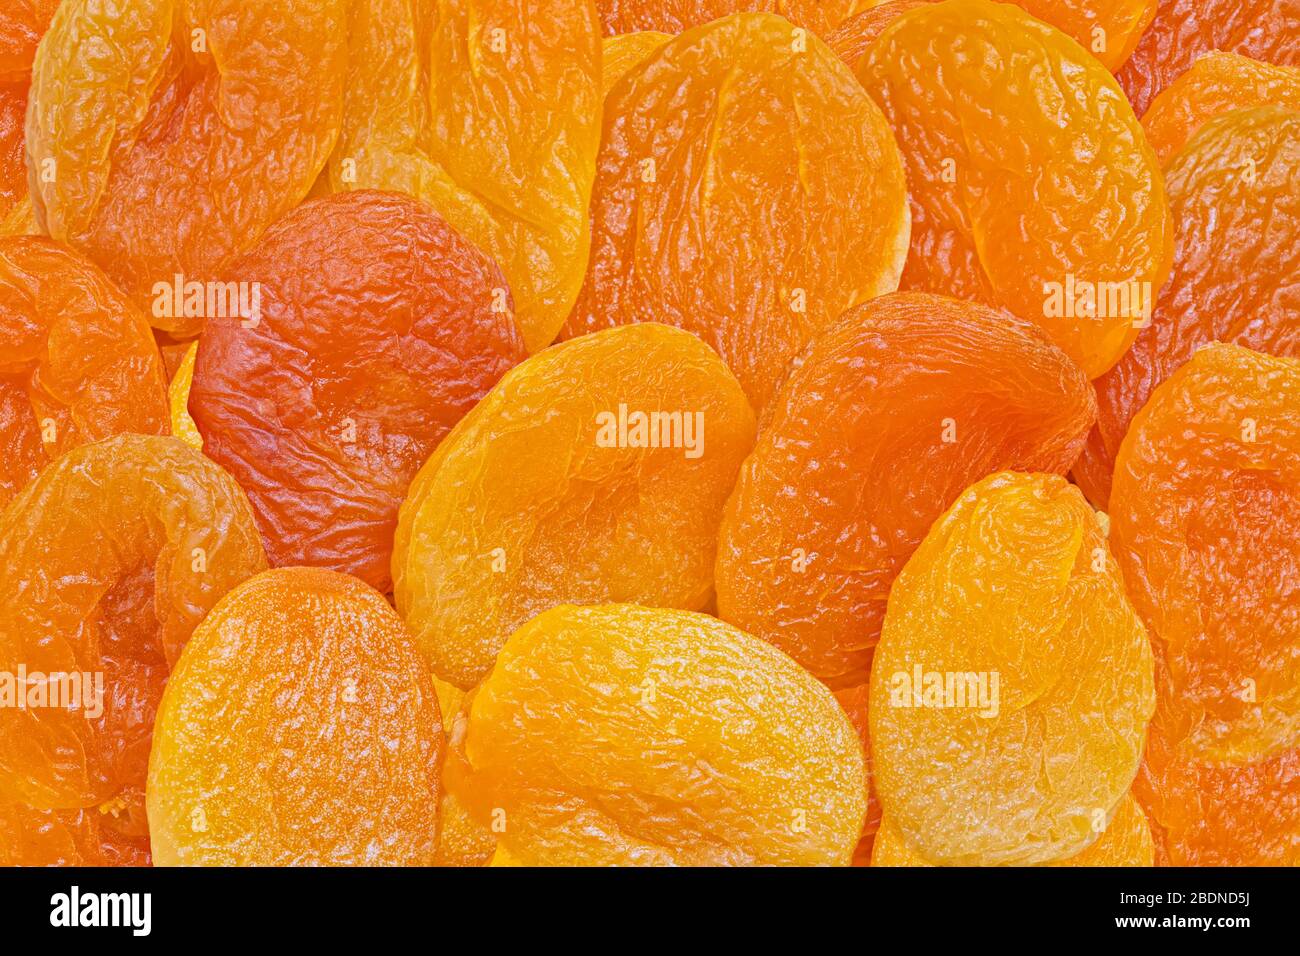 Top view of dried apricots close up. Food background. Stock Photo